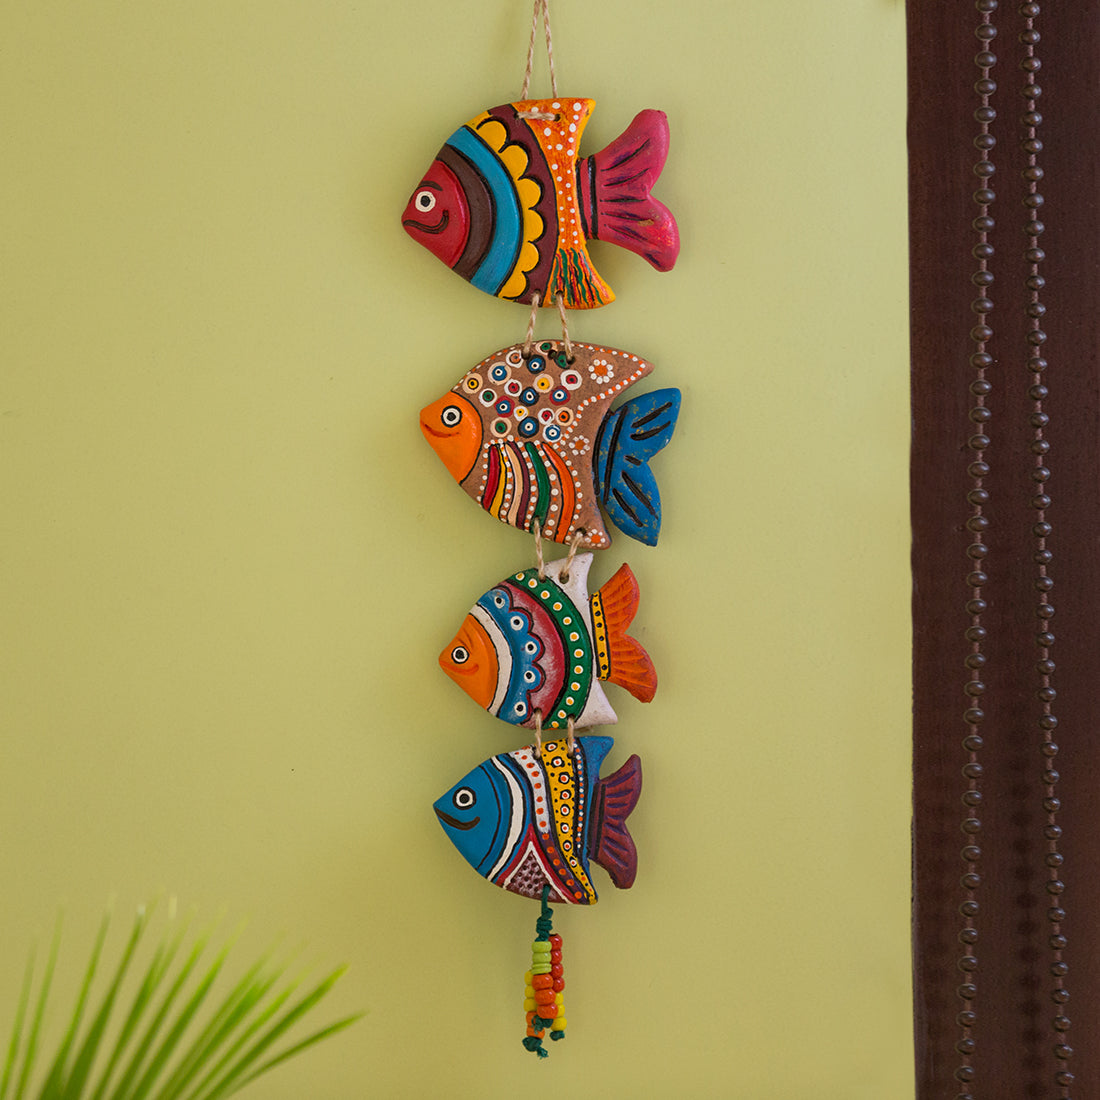 Coloured Fish' Handmade & Hand-Painted Garden Decorative Wall Hanging In Terracotta